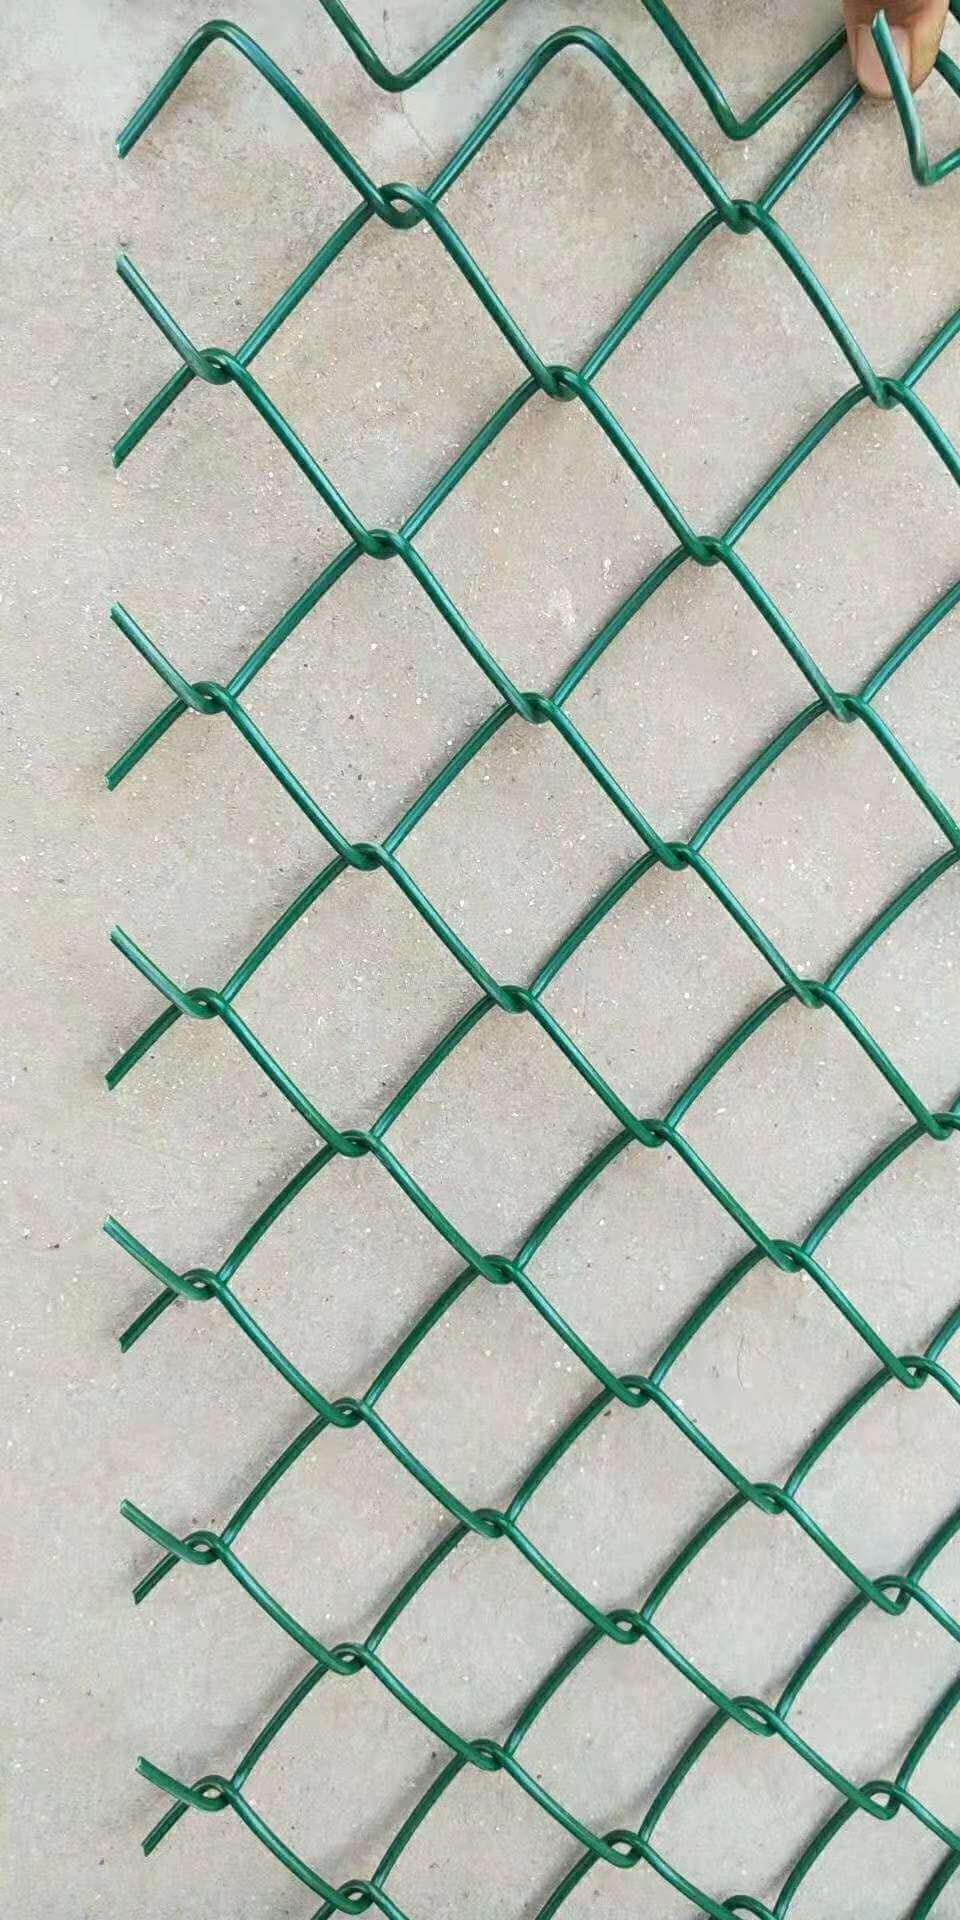 Chain Link Fence Wire Mesh Garden Security Diamond Mesh Fence